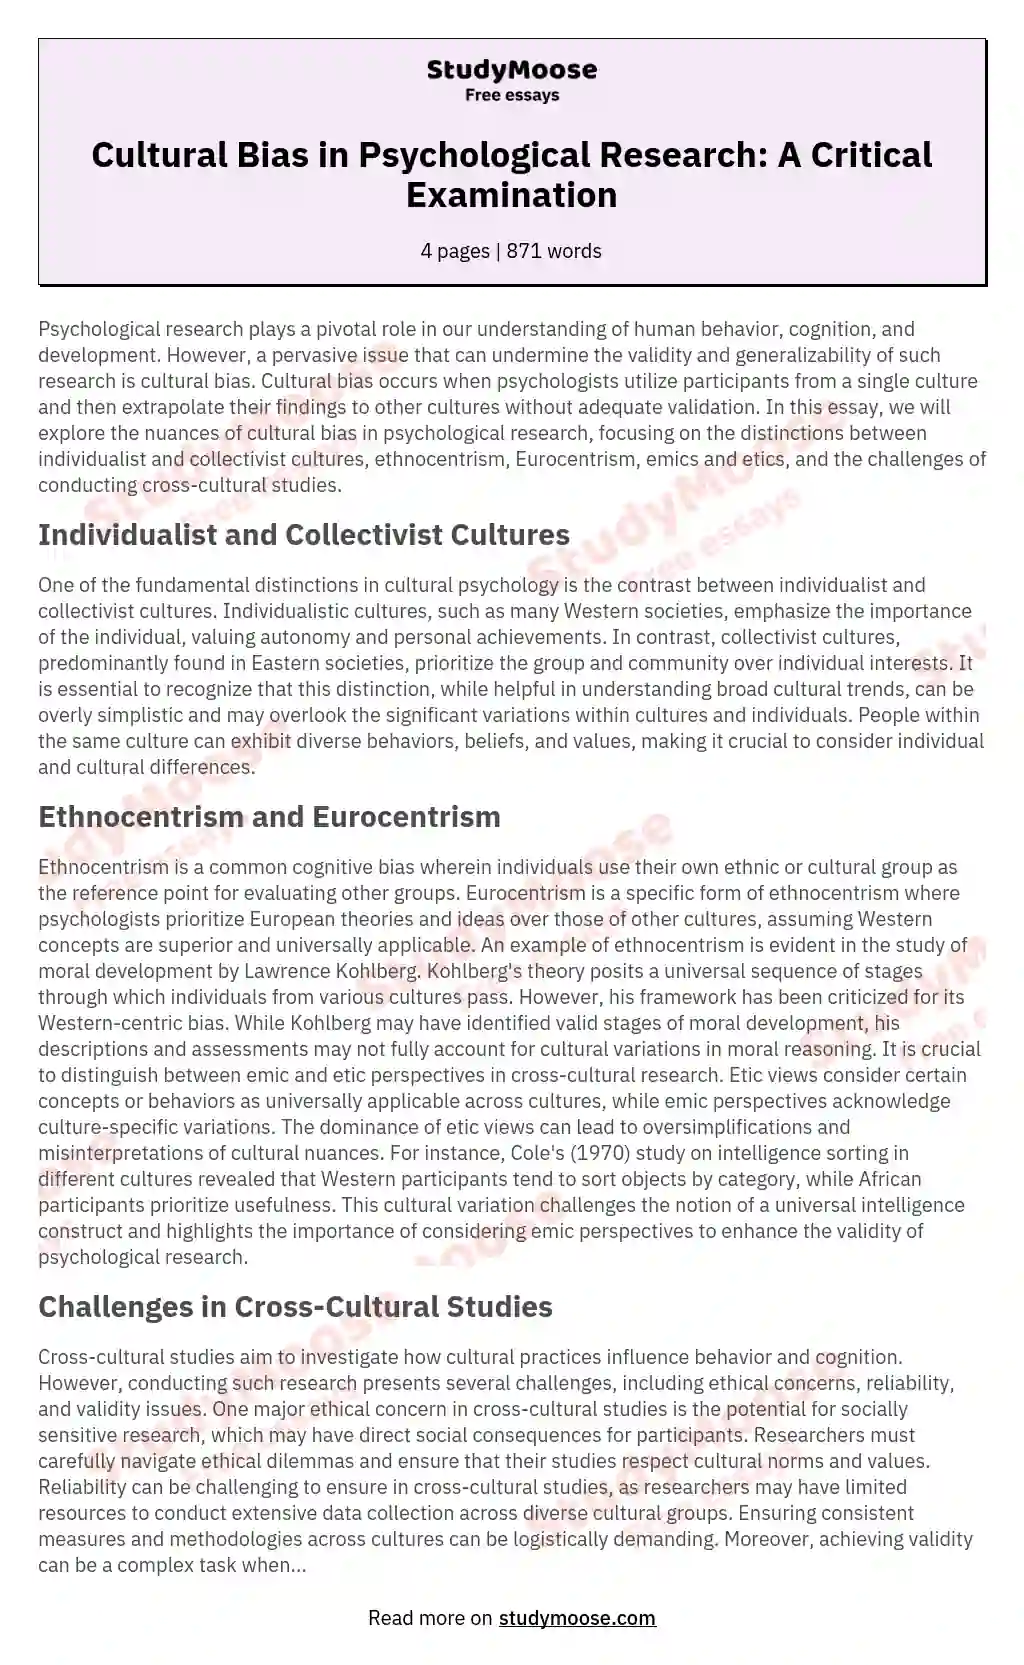 Cultural Bias in Psychological Research: A Critical Examination essay